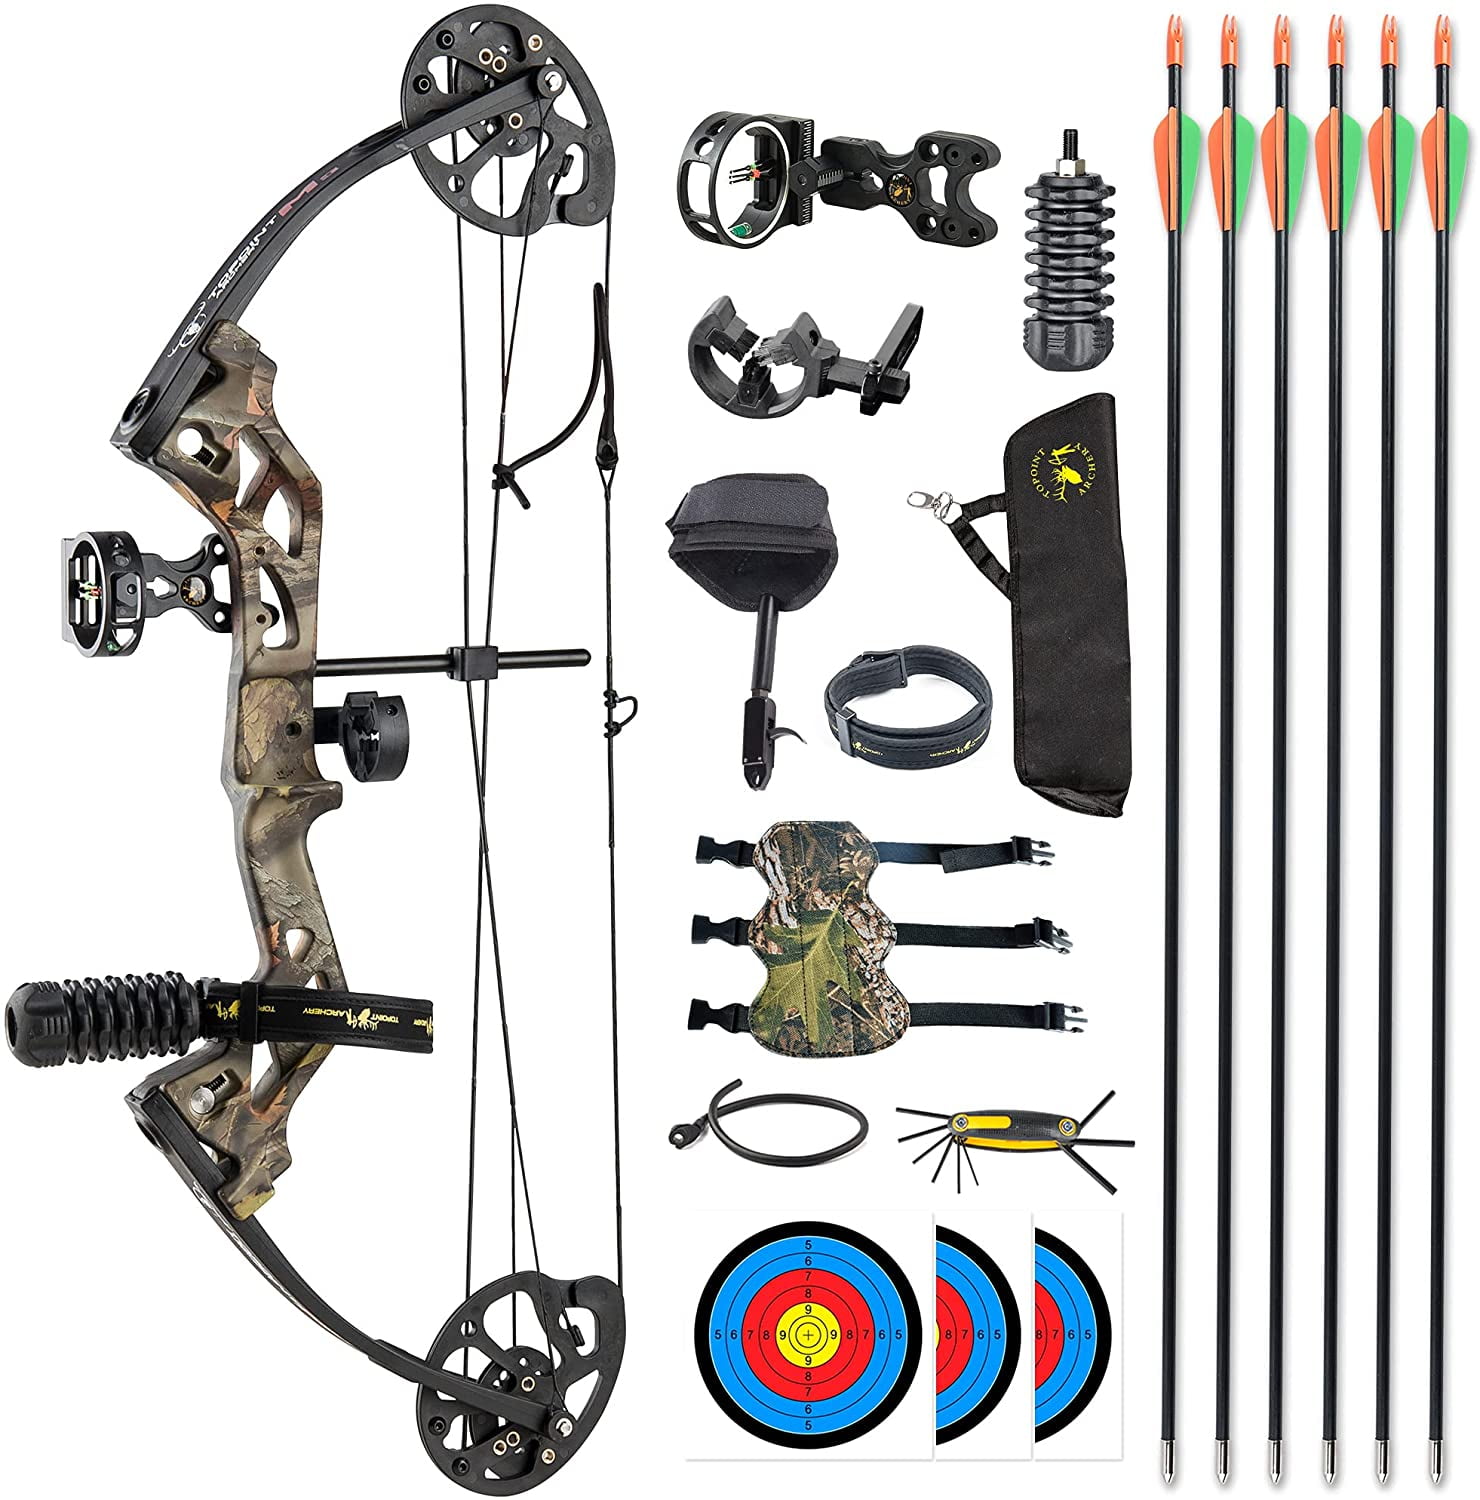 Compound Bow and Archery Sets, Hunting Bow Kit for Beginner,Adult & Kid  Right Hand Archery Compound Bows - 10-30Lbs Adjustable Draw Weight, 17-27  Draw Length, 260fps IBO 